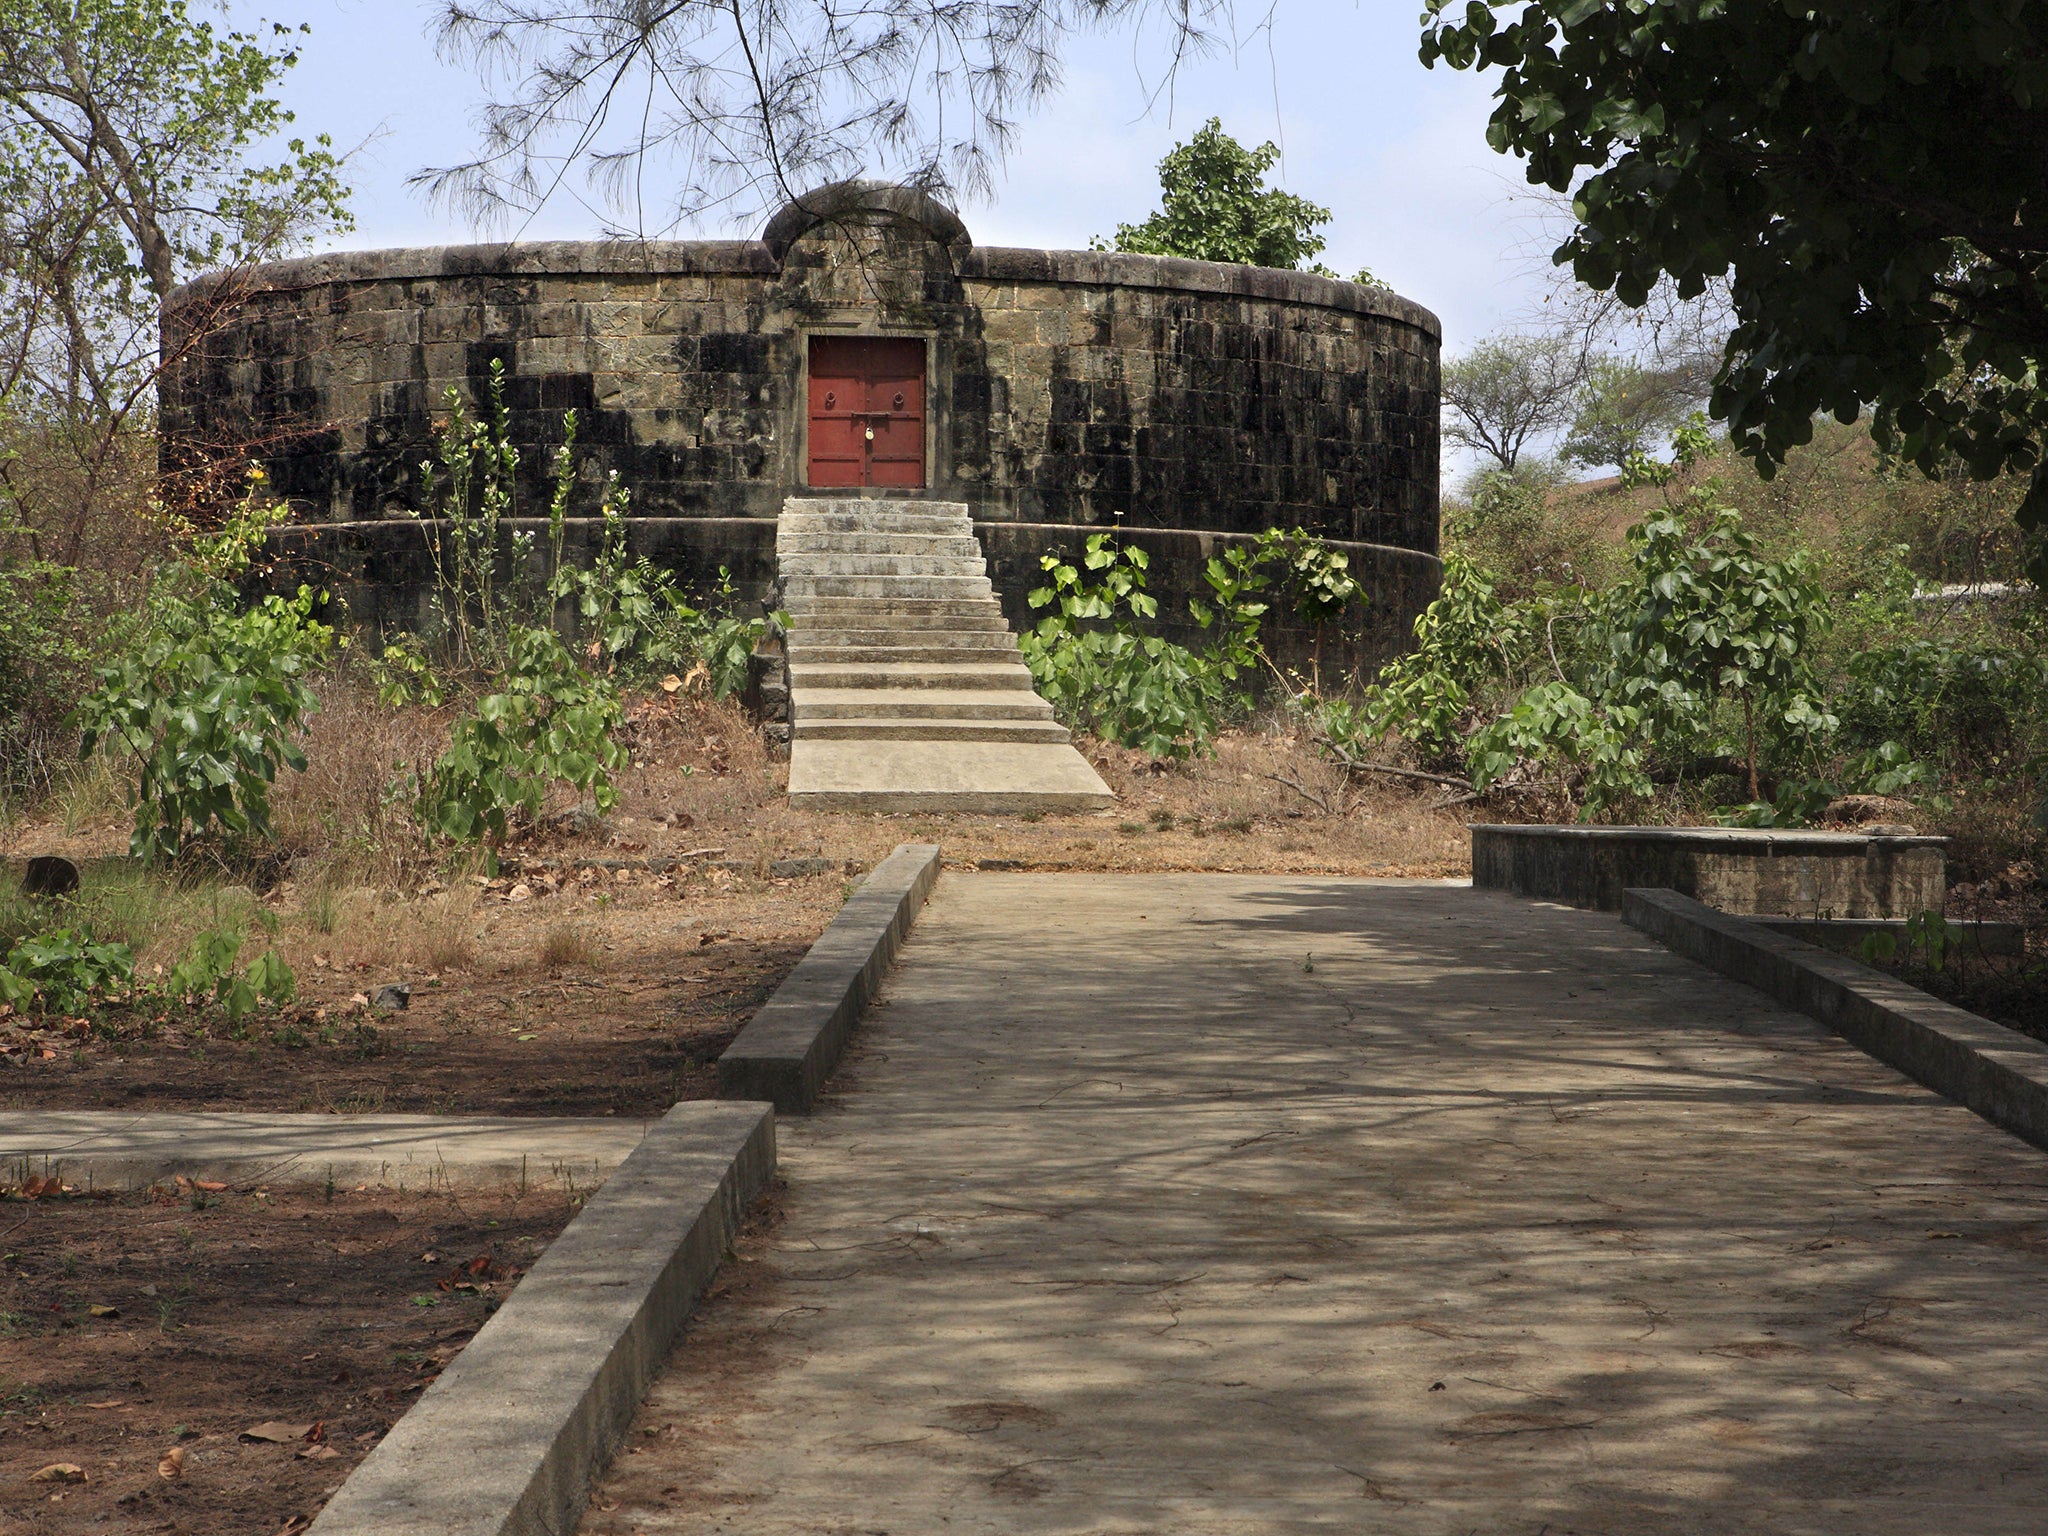 The Dakhma (or the Tower of Silence ) in Gujarat is where the Parsi community dispose of their dead. The Parsi neither burn or bury their dead but feed the bodies to vultures